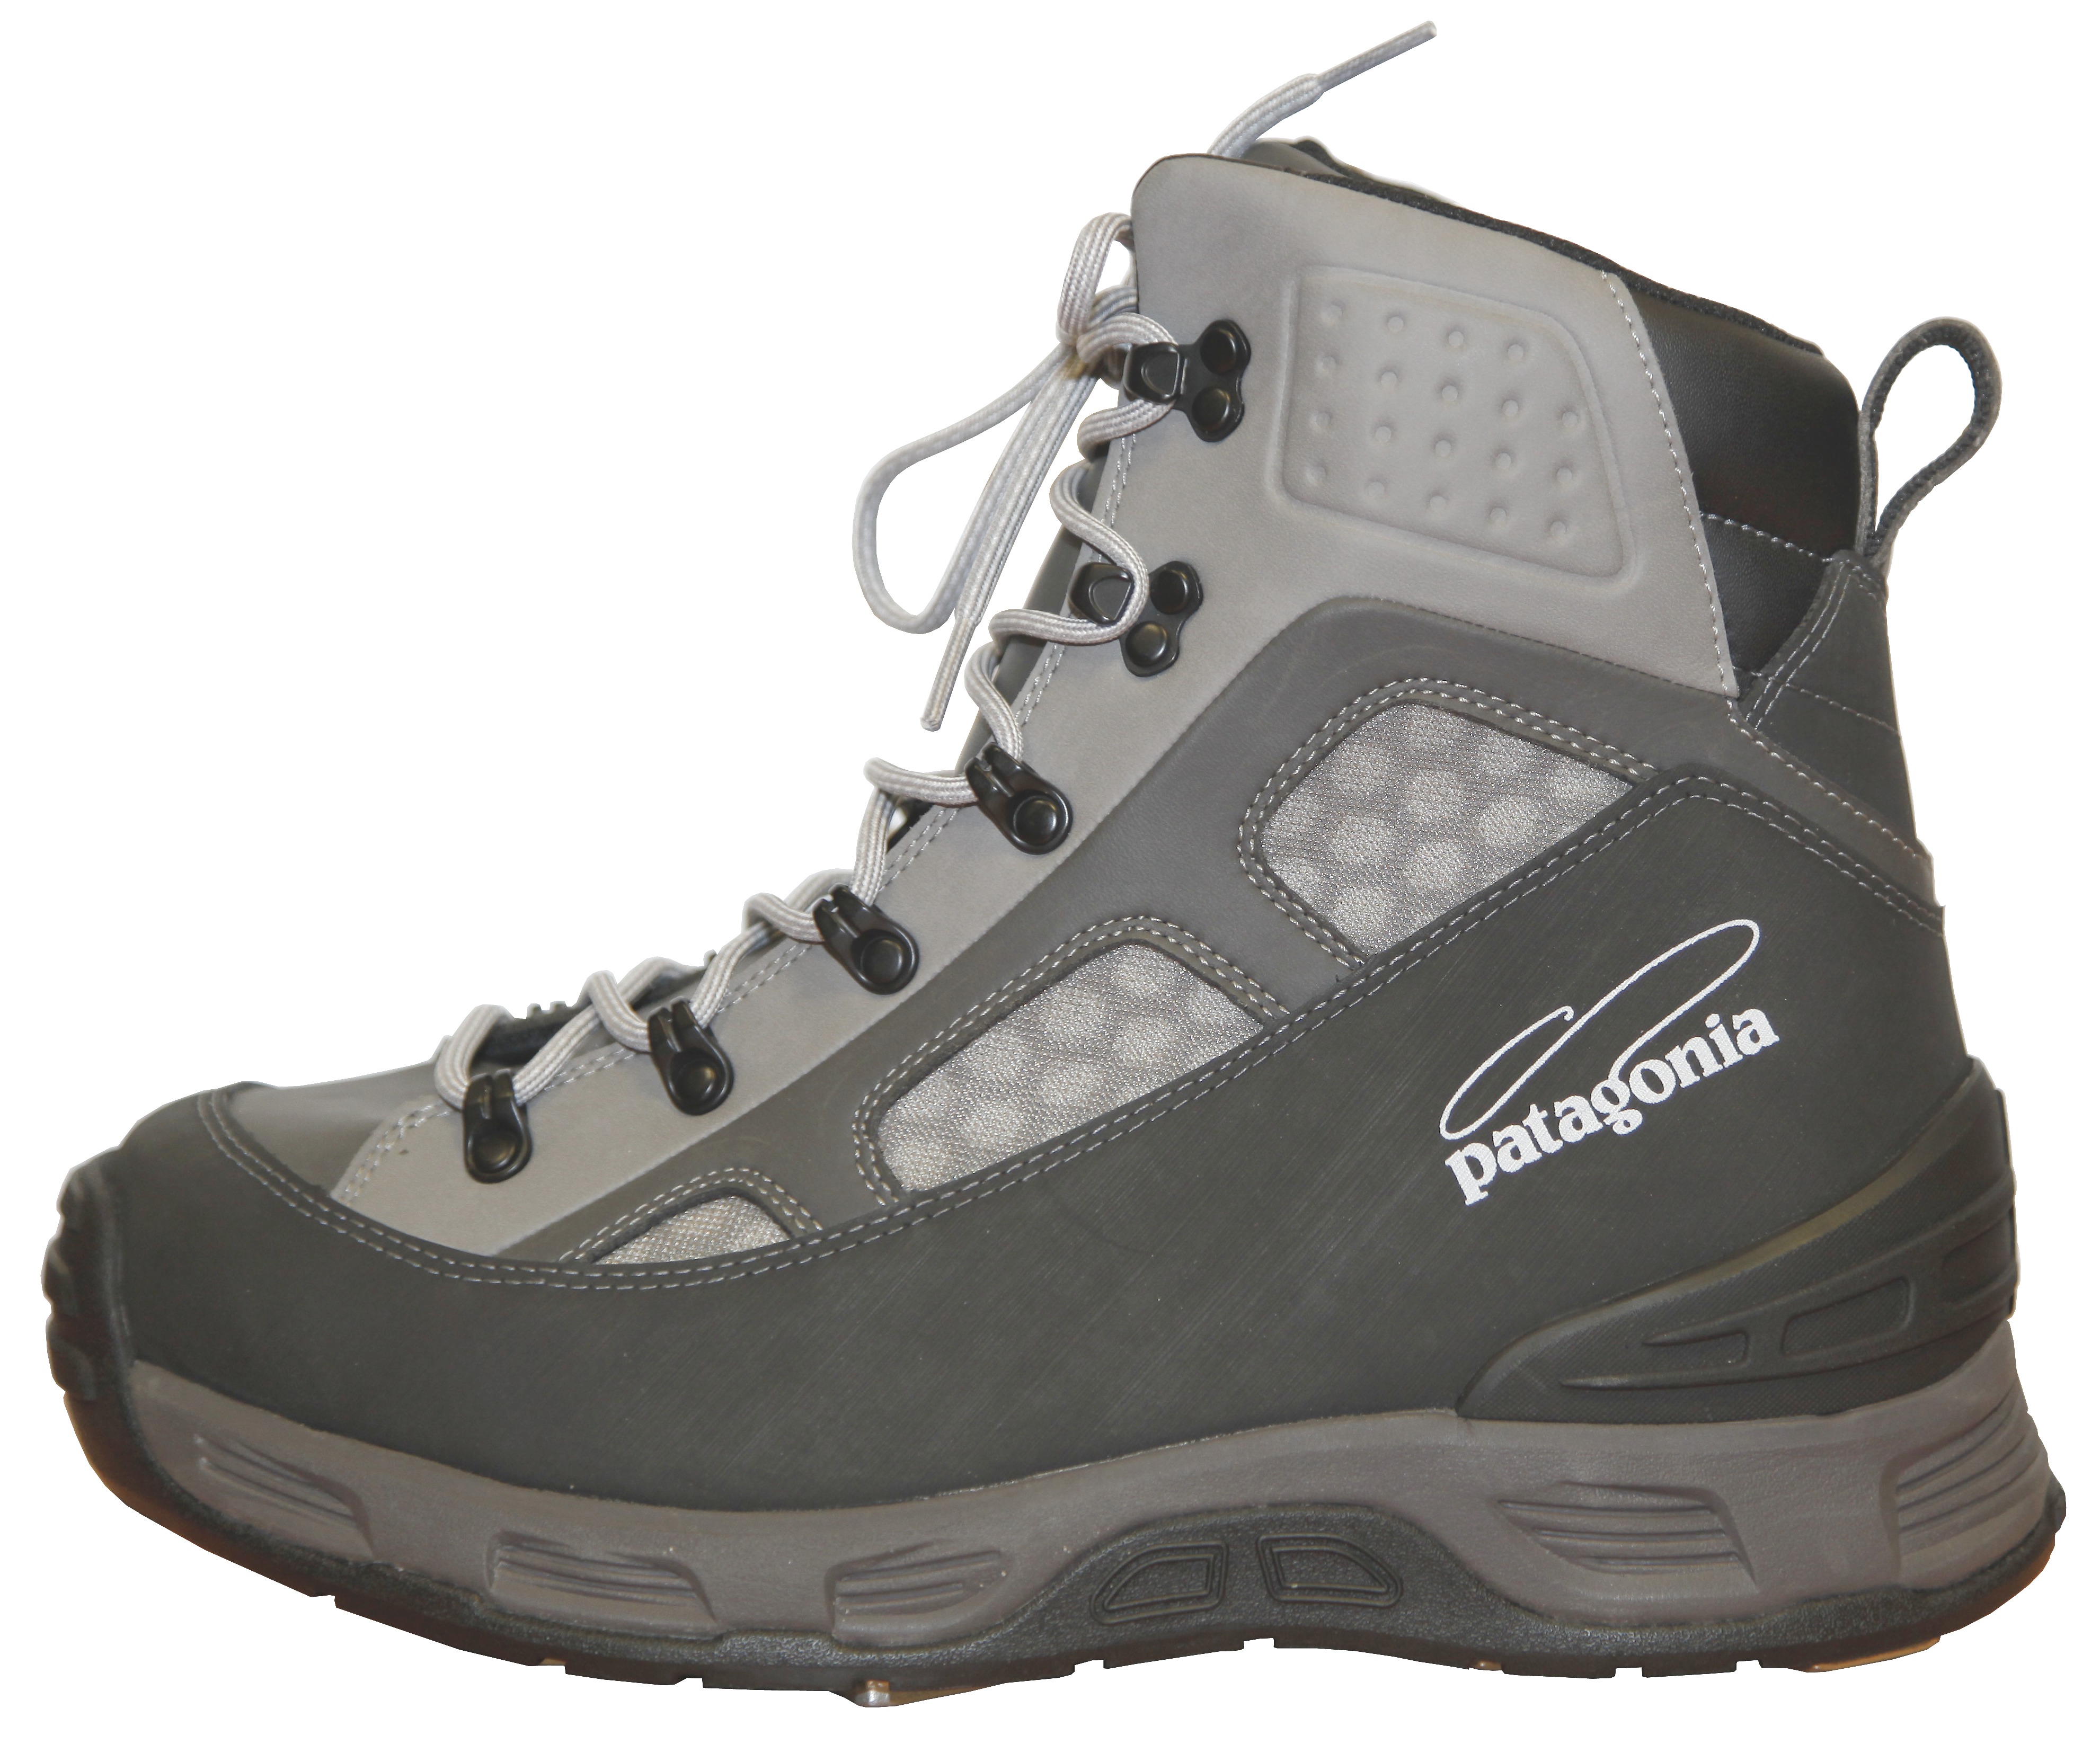 Patagonia Foot Tractor Wading Boots 